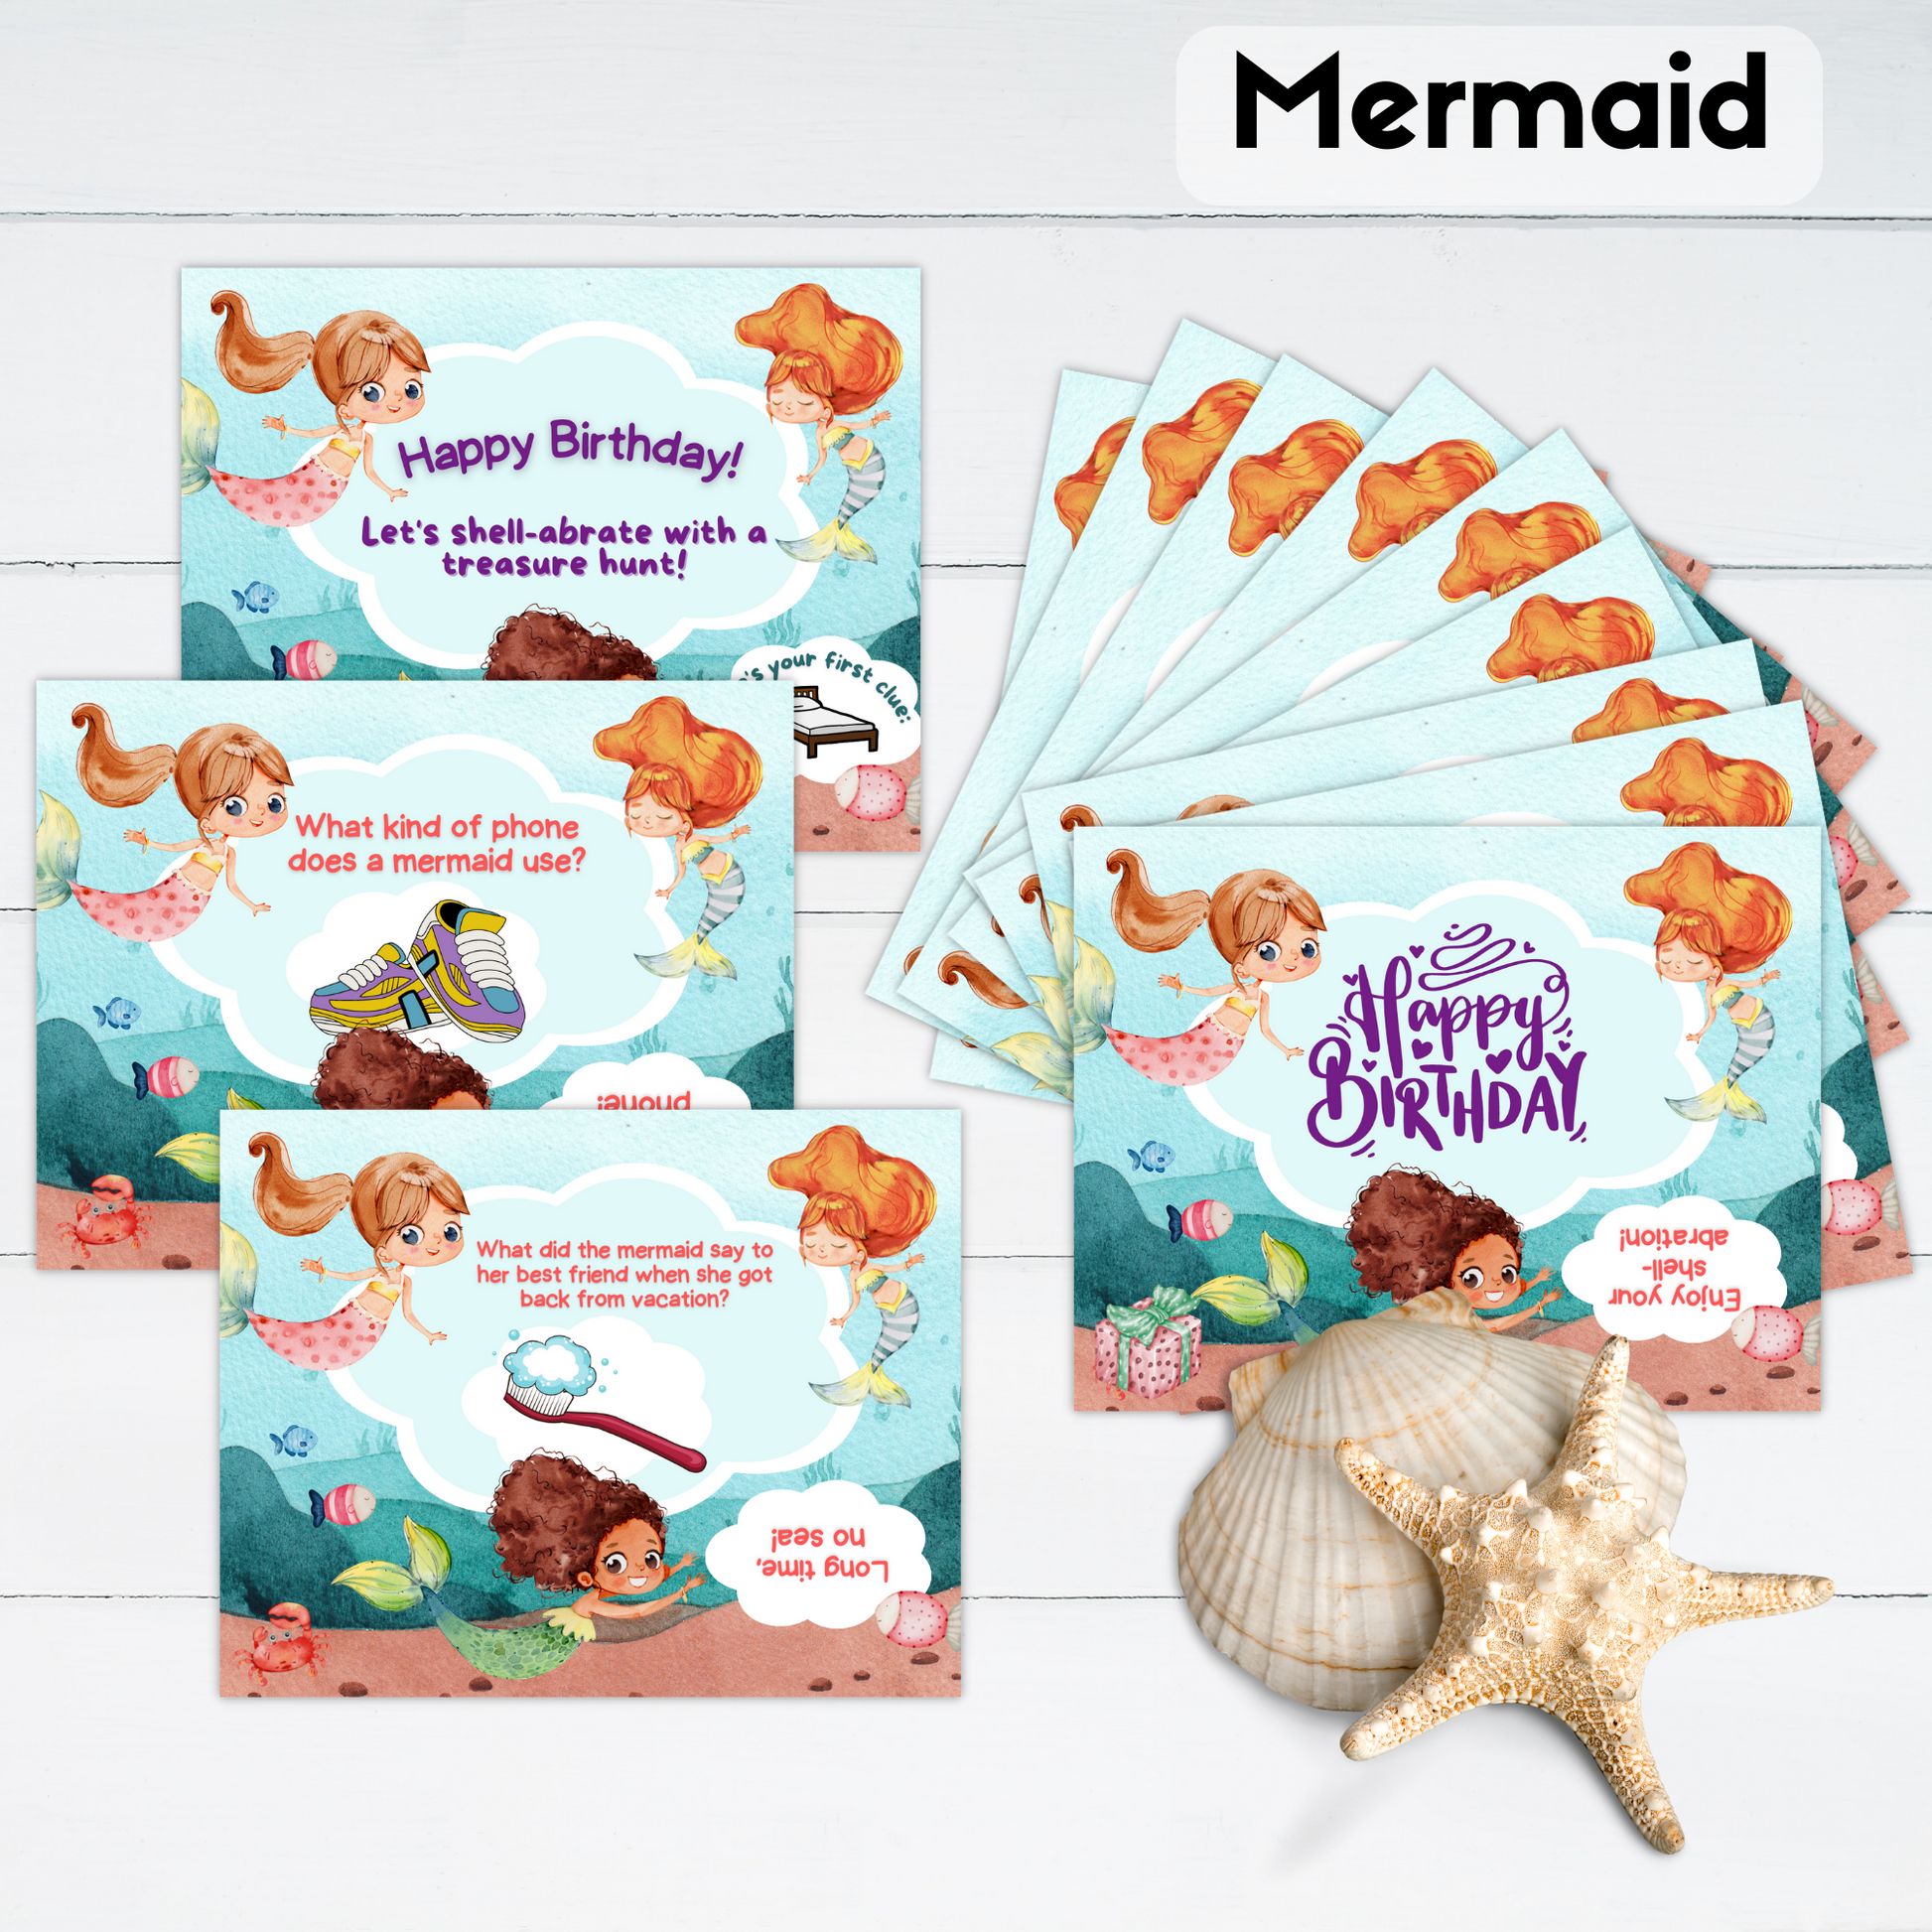 The cards for a mermaid themed treasure hunt are displayed with some sea shells.